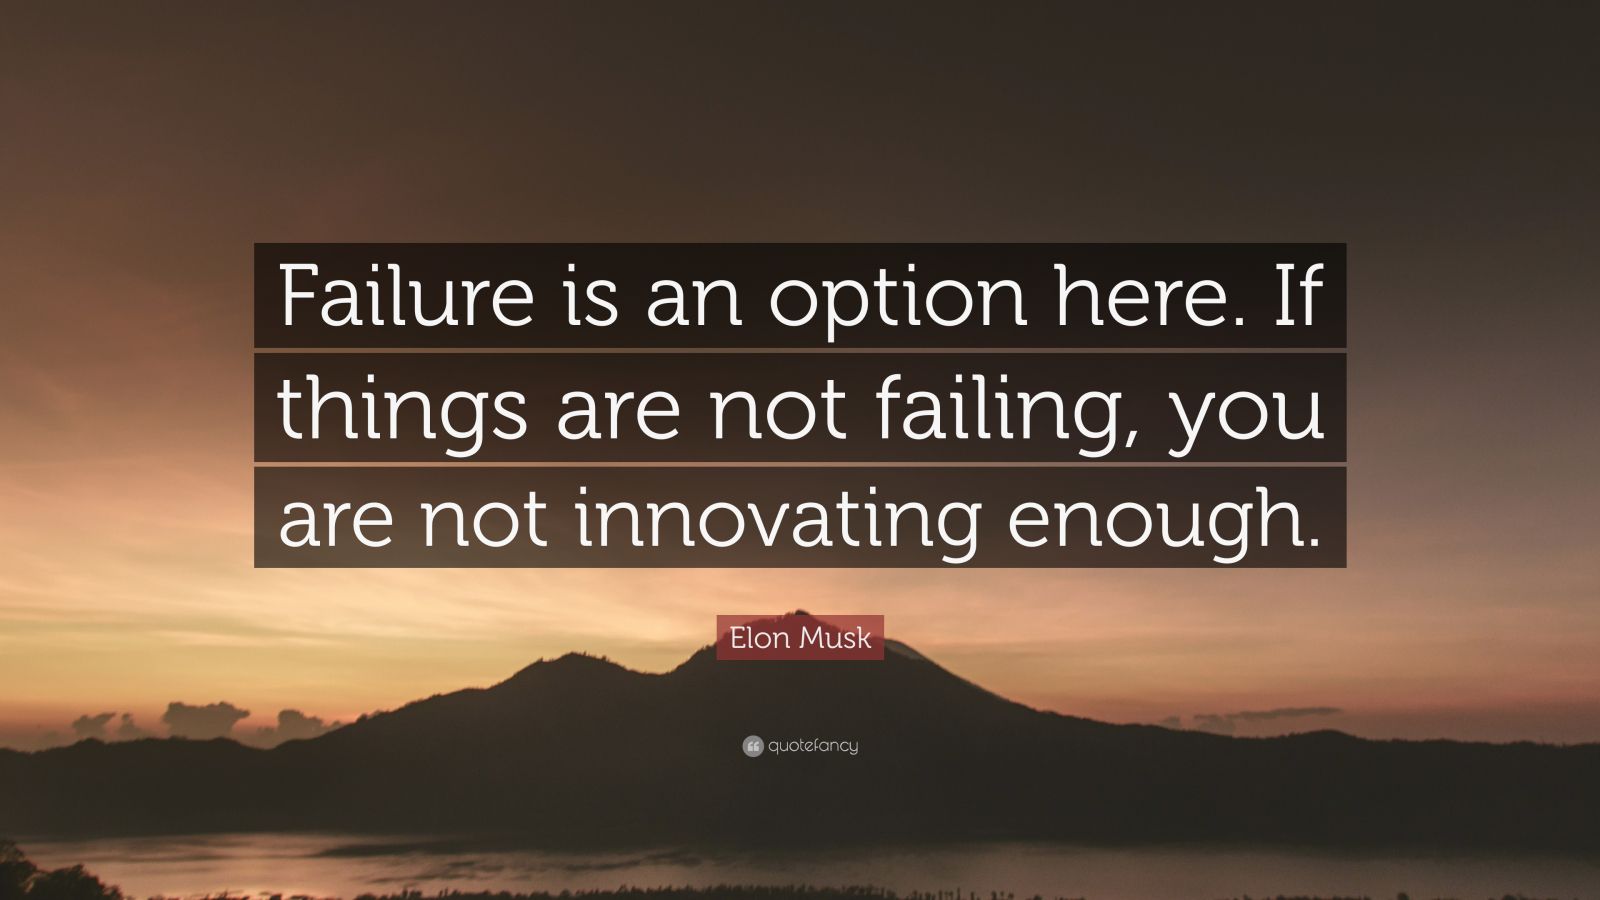 Elon Musk Quote: “Failure is an option here. If things are not failing